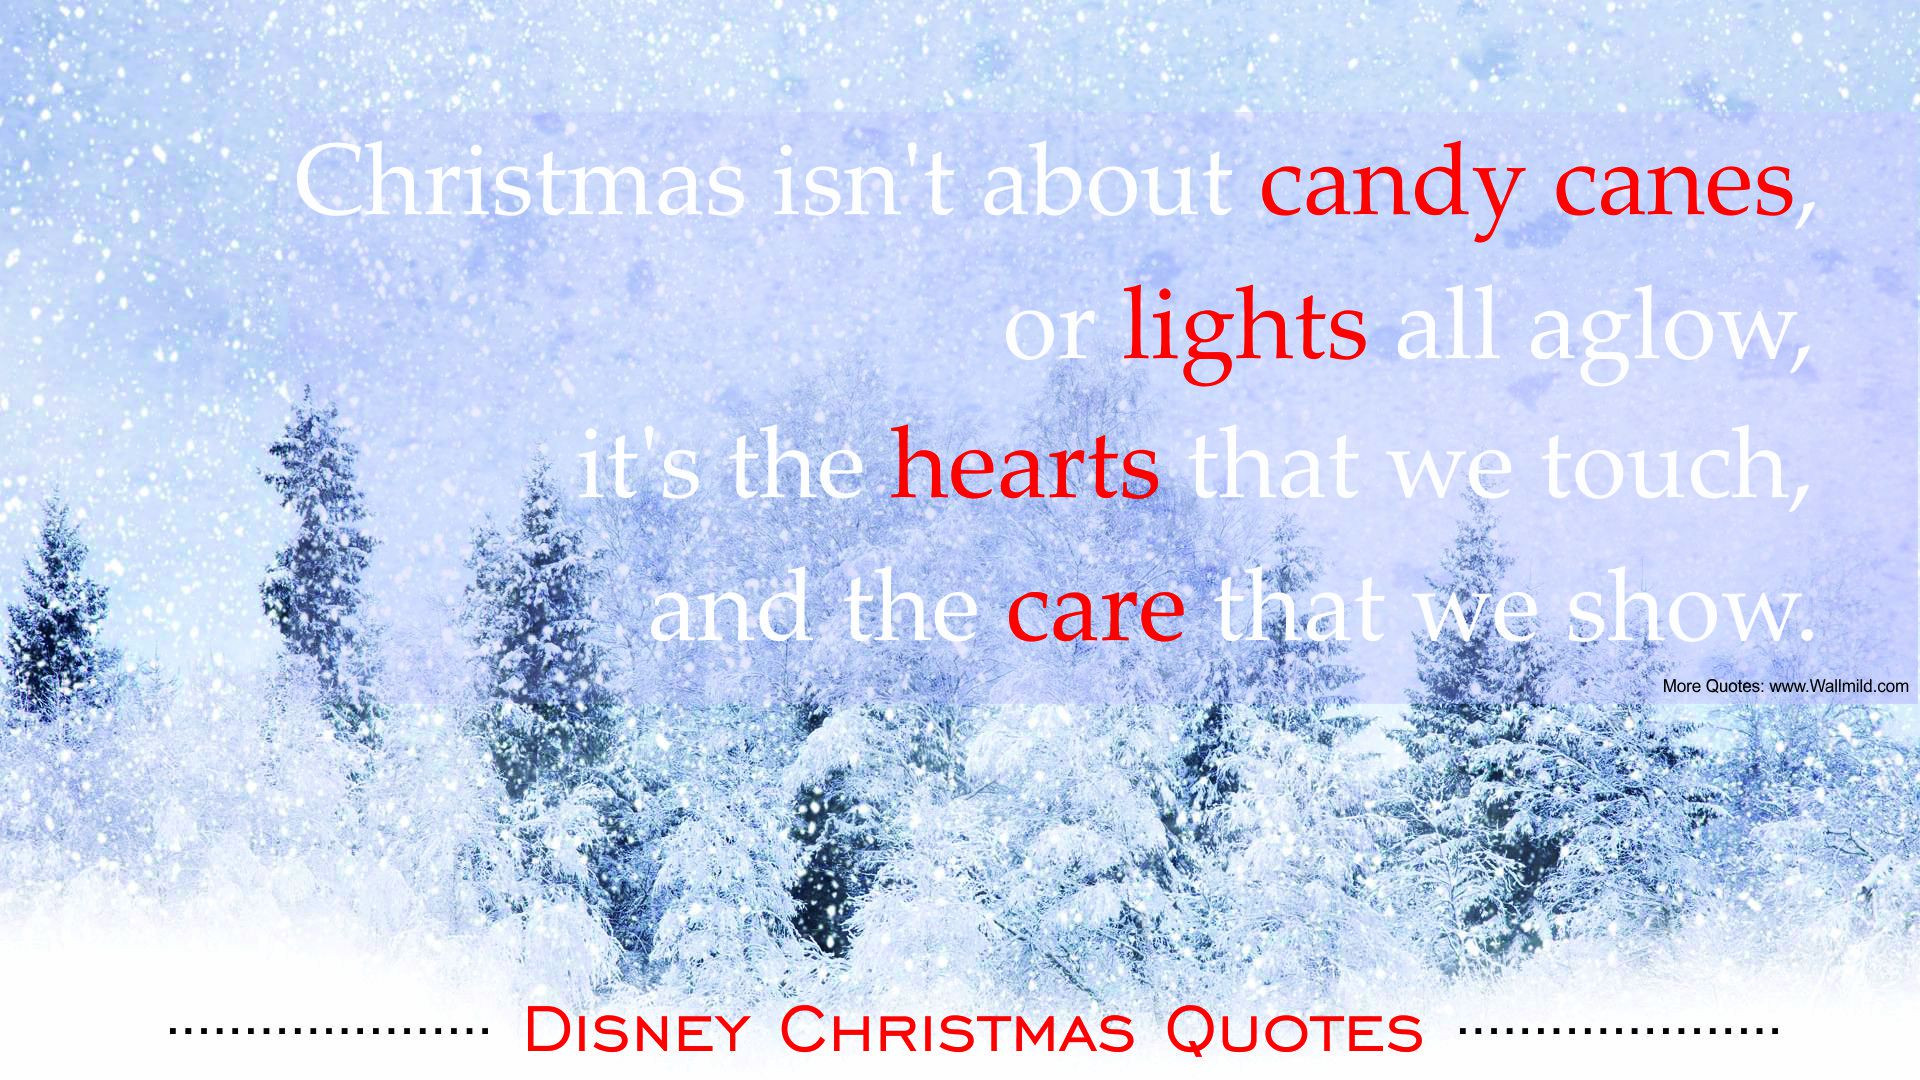 Disney Christmas Quotes
 20 Merry Christmas Quotes 2014